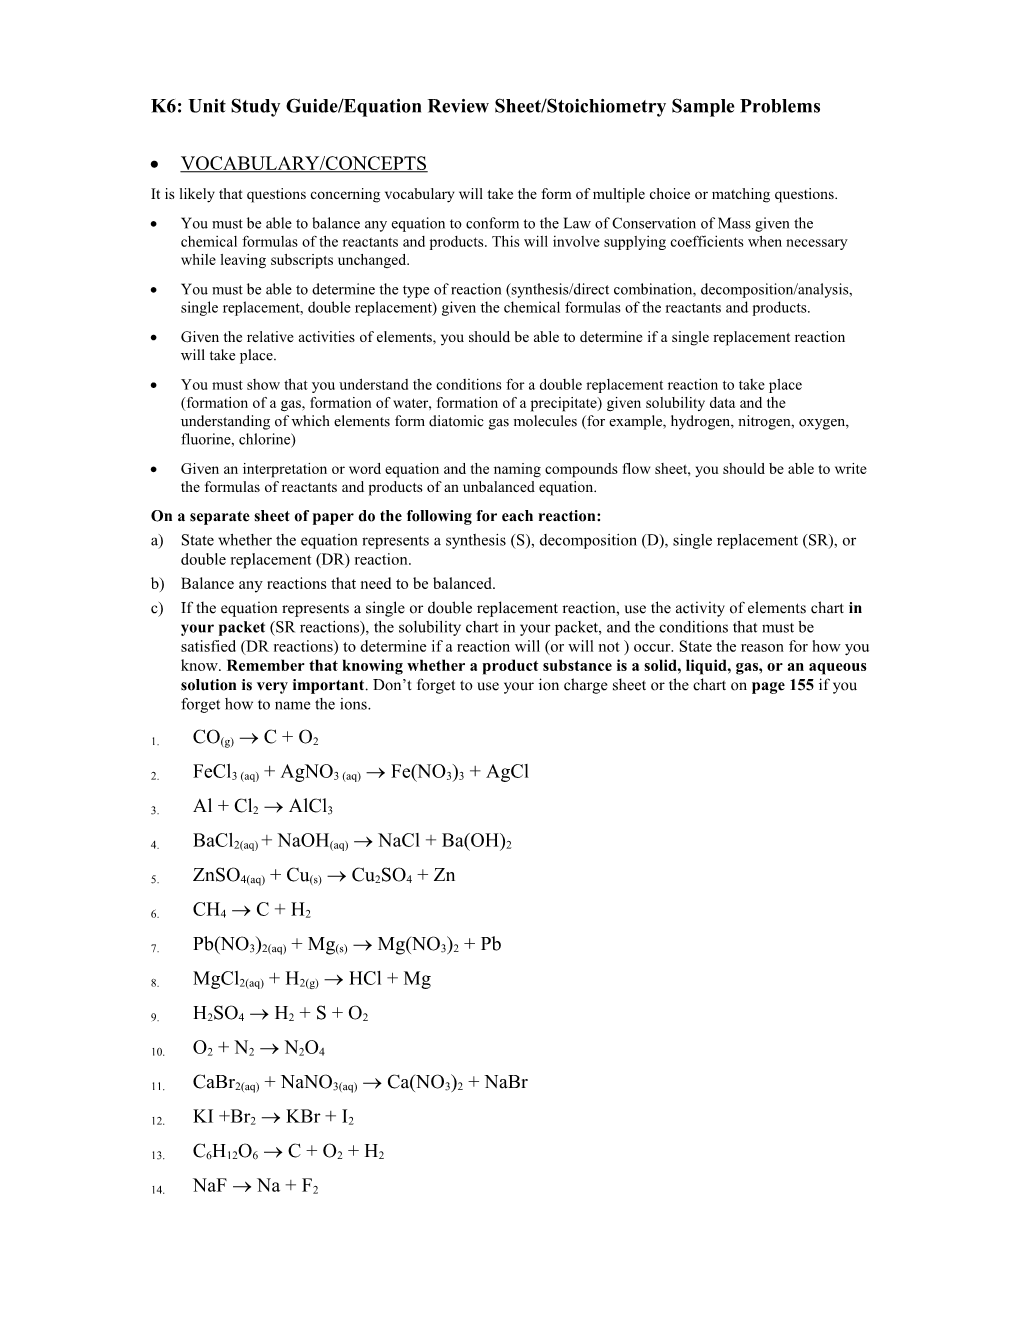 K6: Unit Study Guide/Equation Review Sheet/Stoichiometry Sample Problems